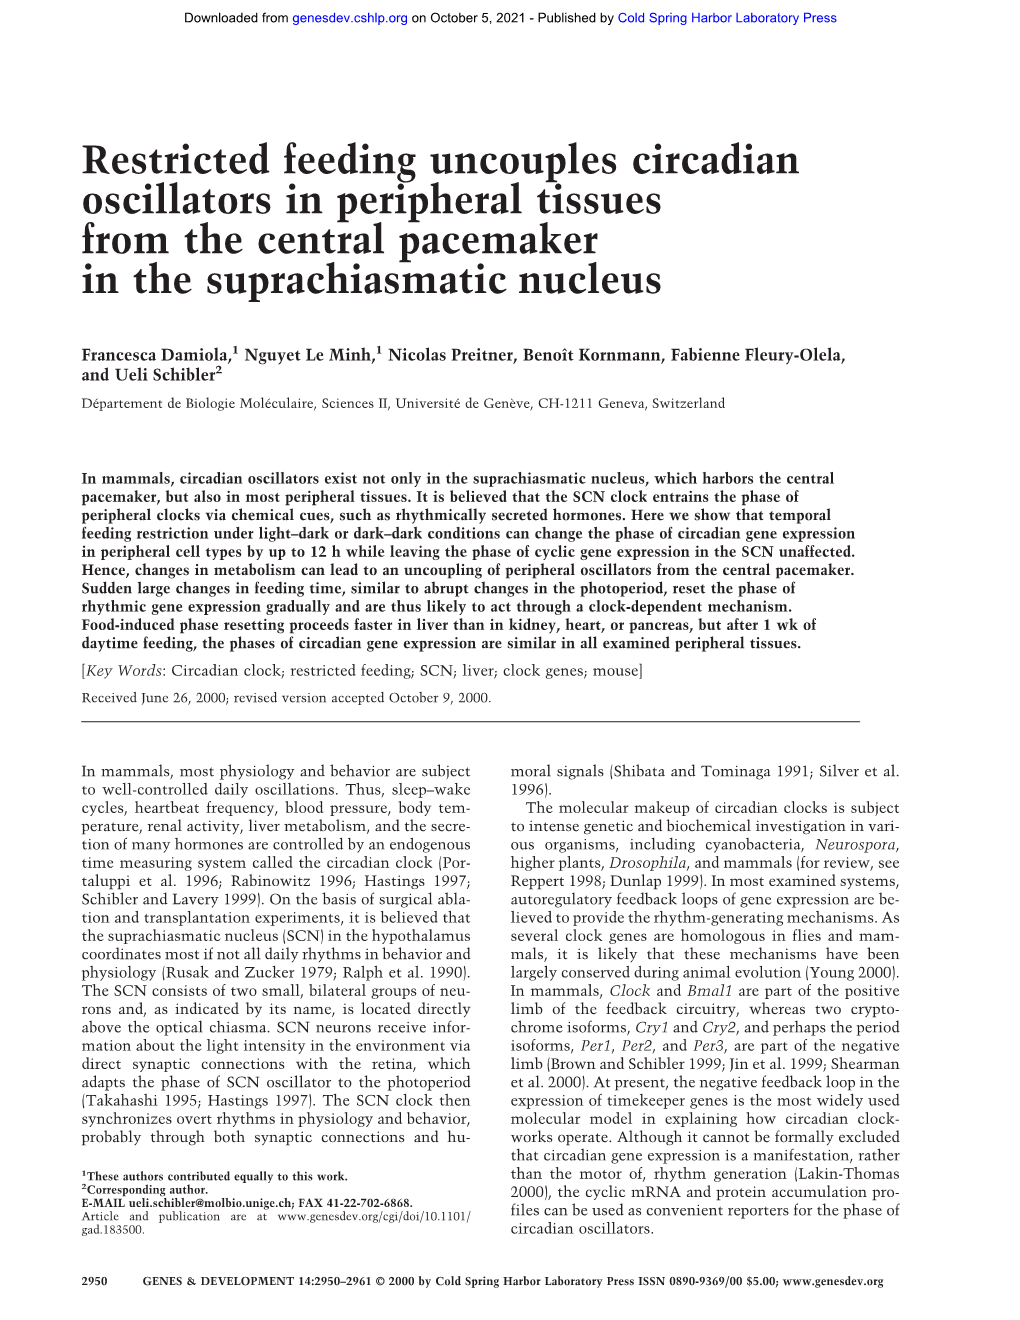 Restricted Feeding Uncouples Circadian Oscillators in Peripheral Tissues from the Central Pacemaker in the Suprachiasmatic Nucleus